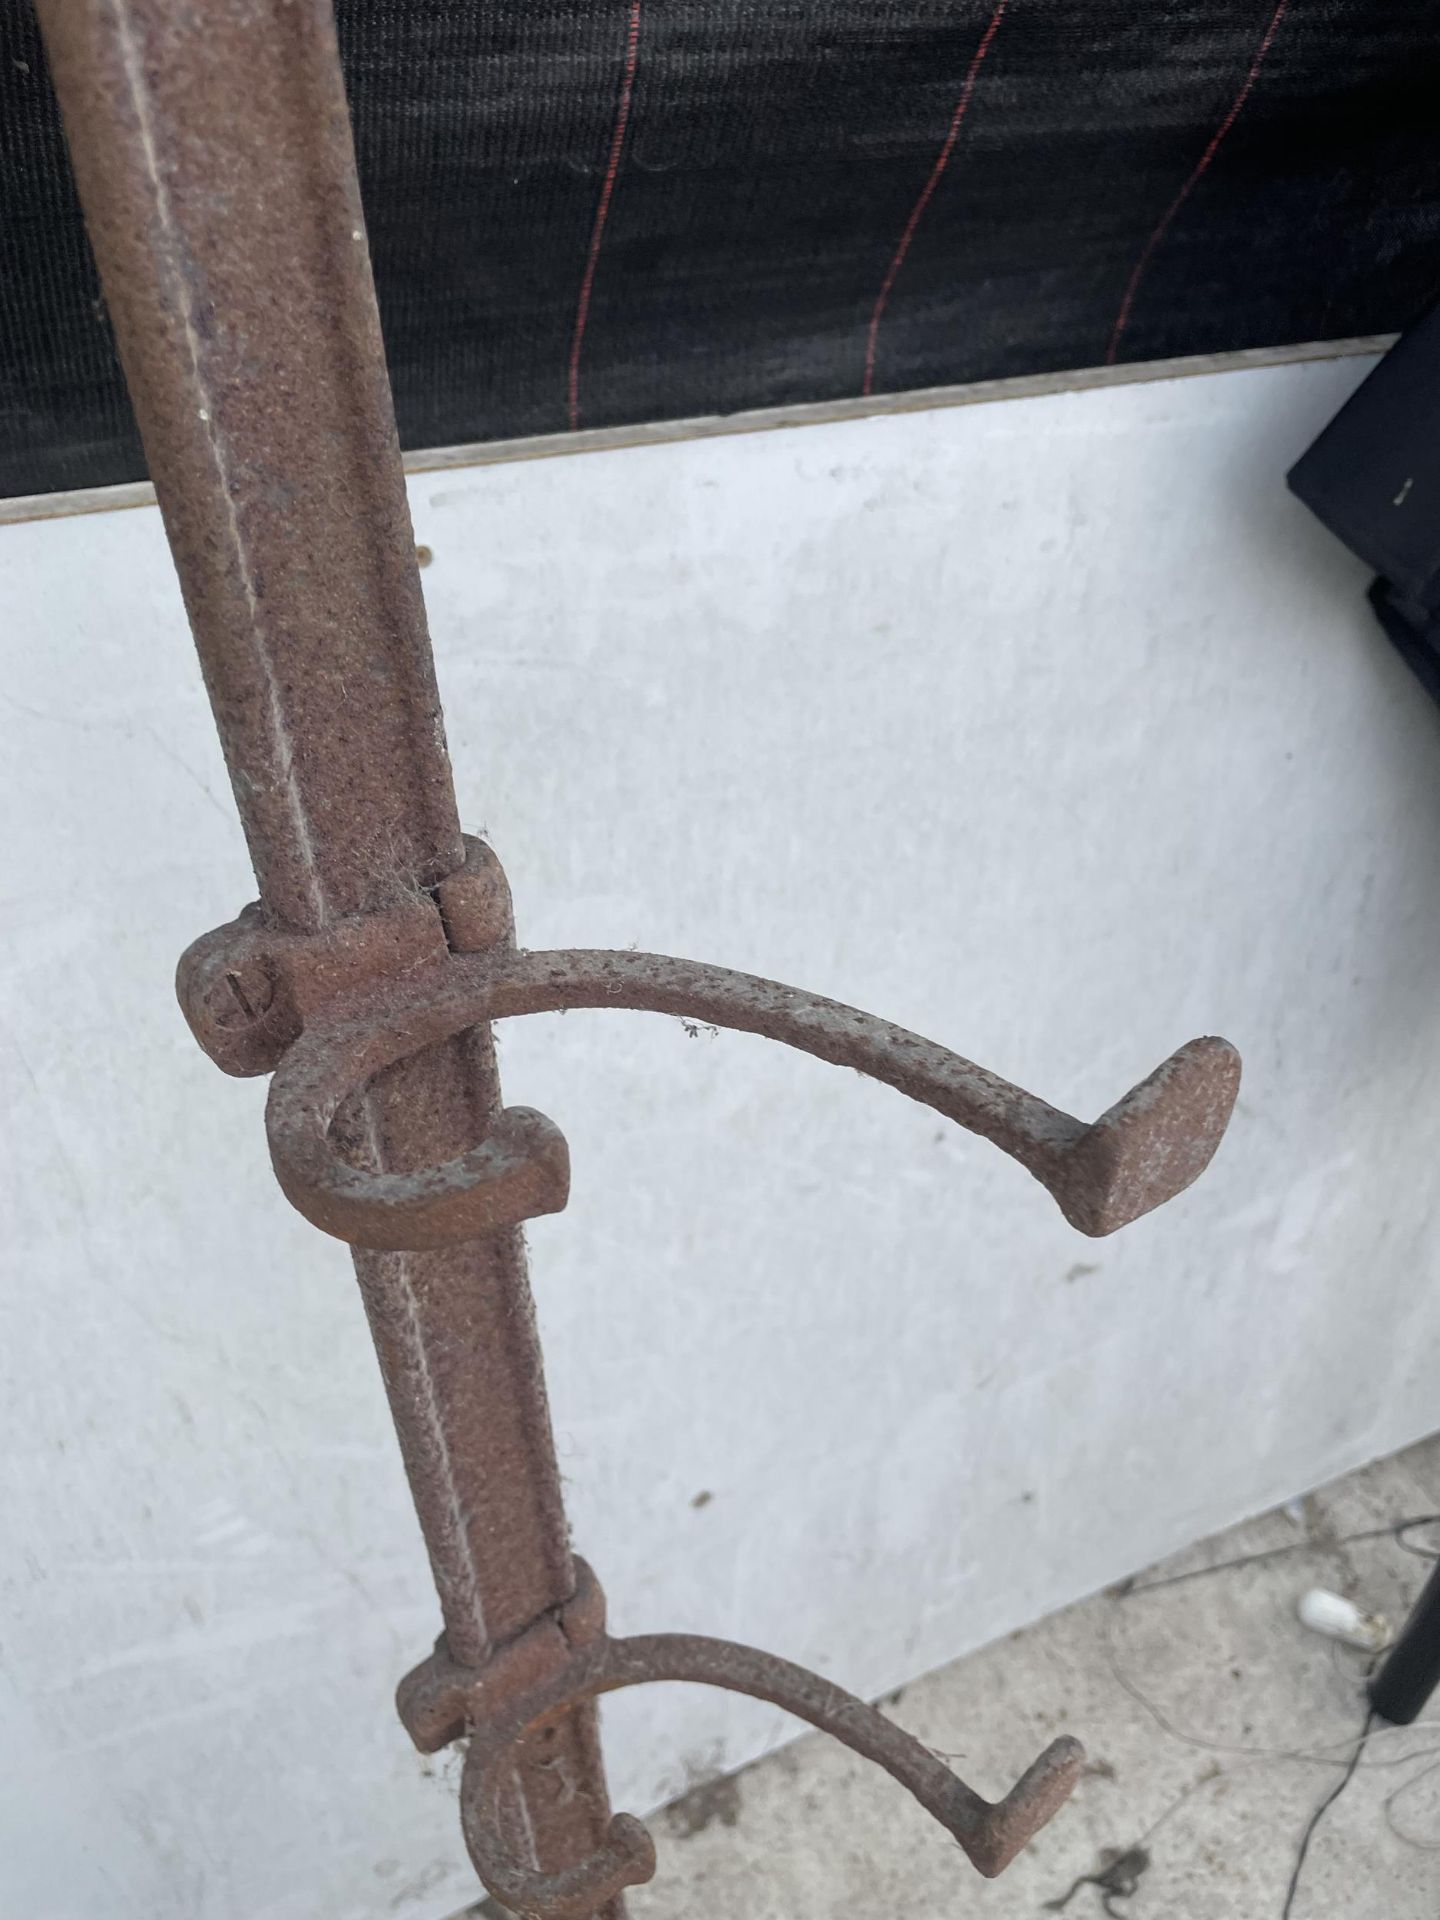 A VINTAGE WROUGHT IRON COAT HOOK - Image 2 of 2